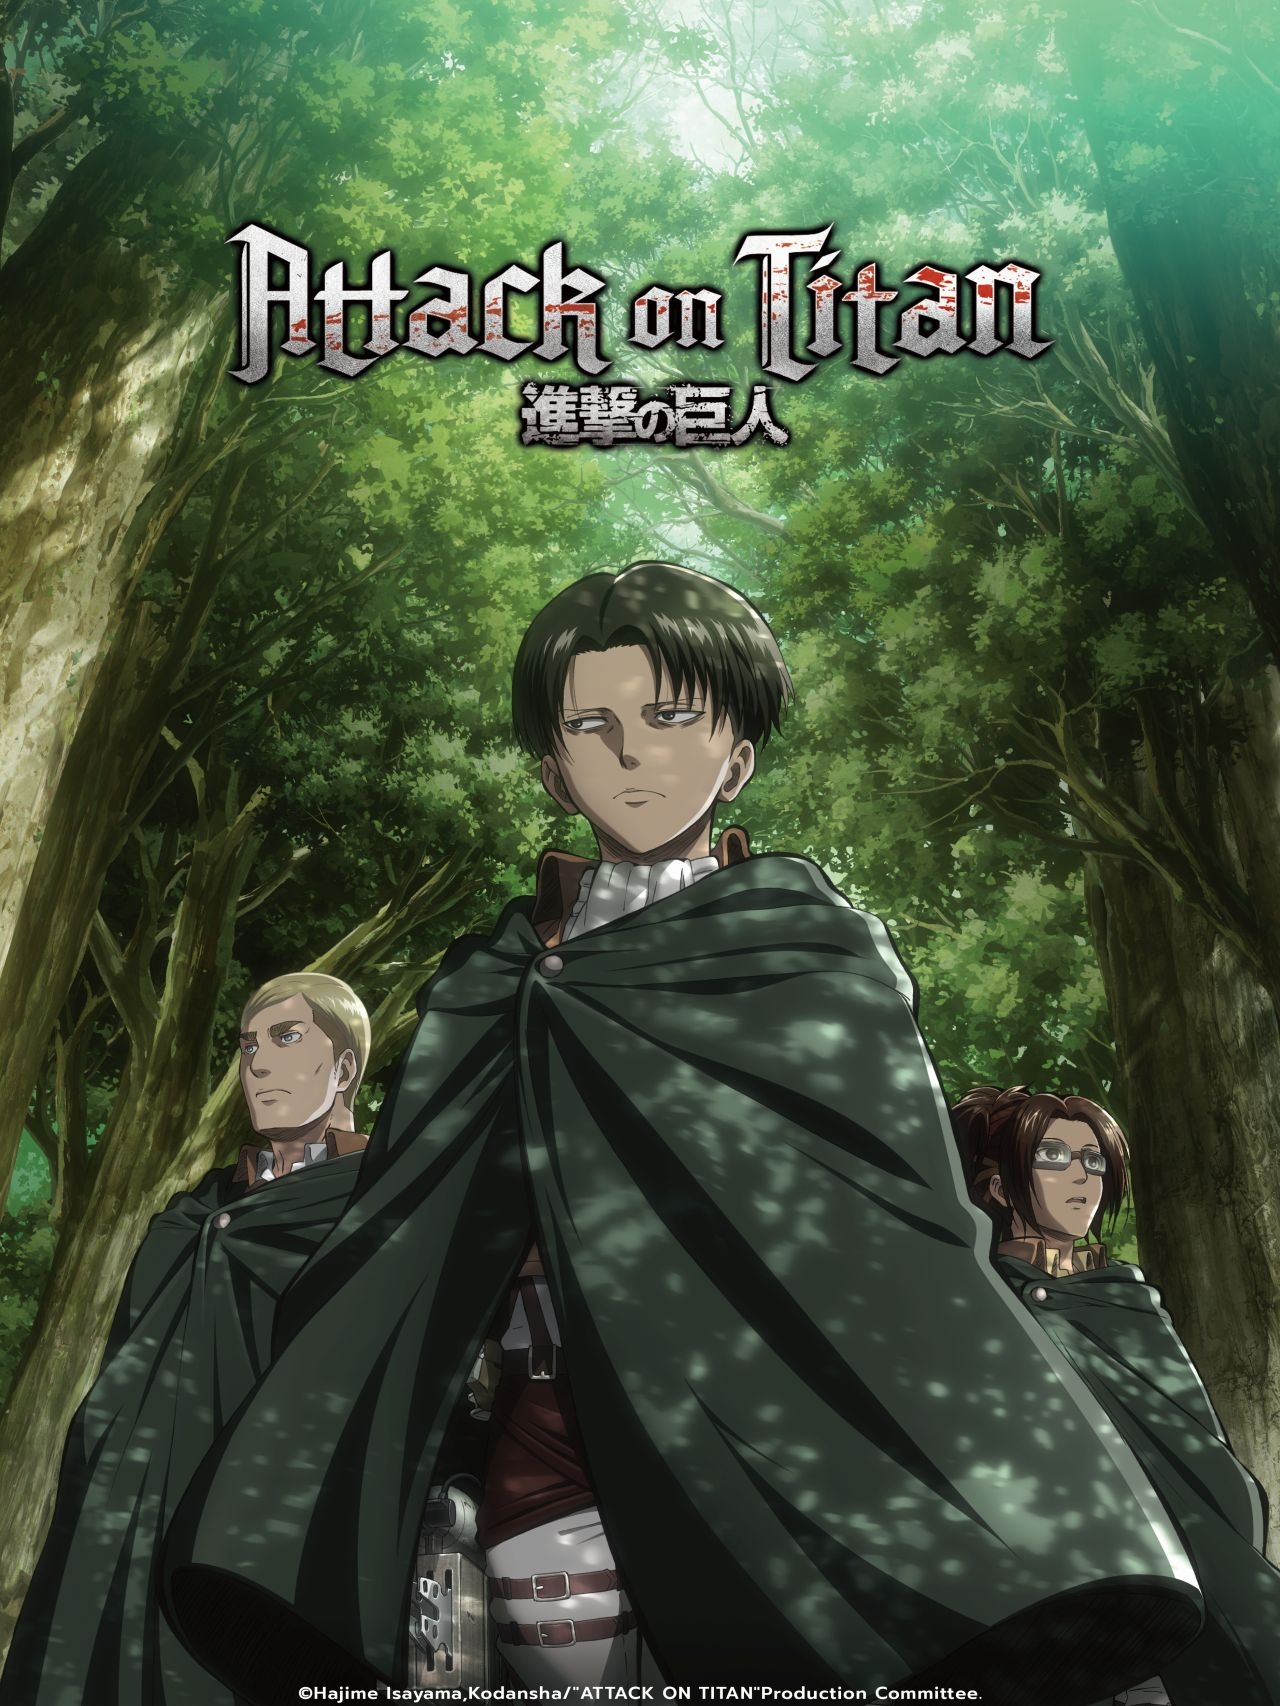 How many episodes of 'Attack On Titan' are there?